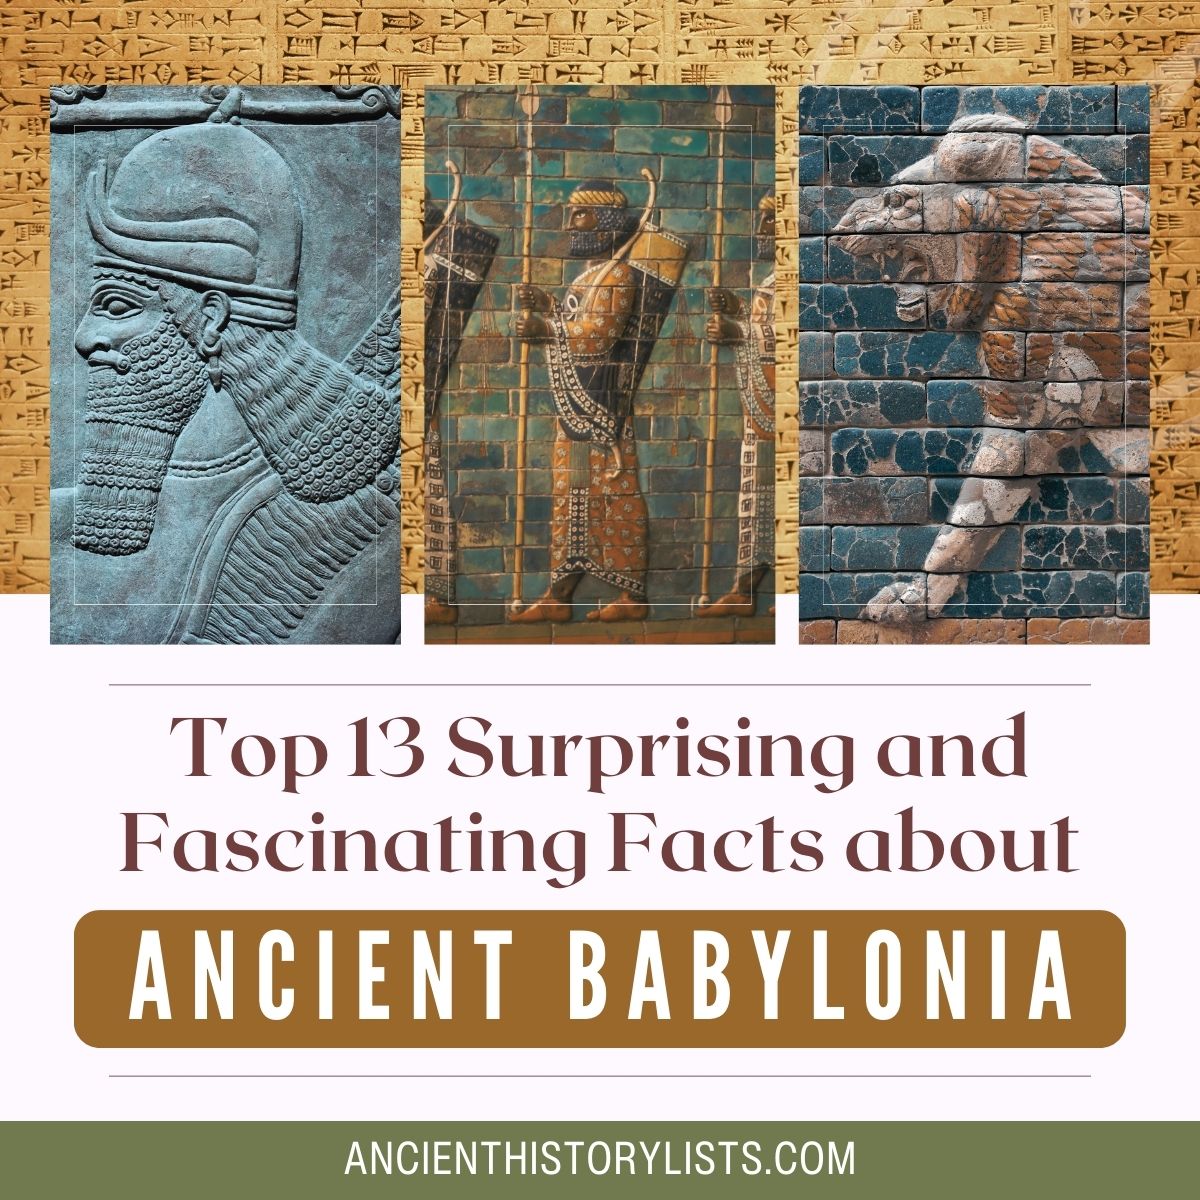 Fascinating Facts about Ancient Babylonia